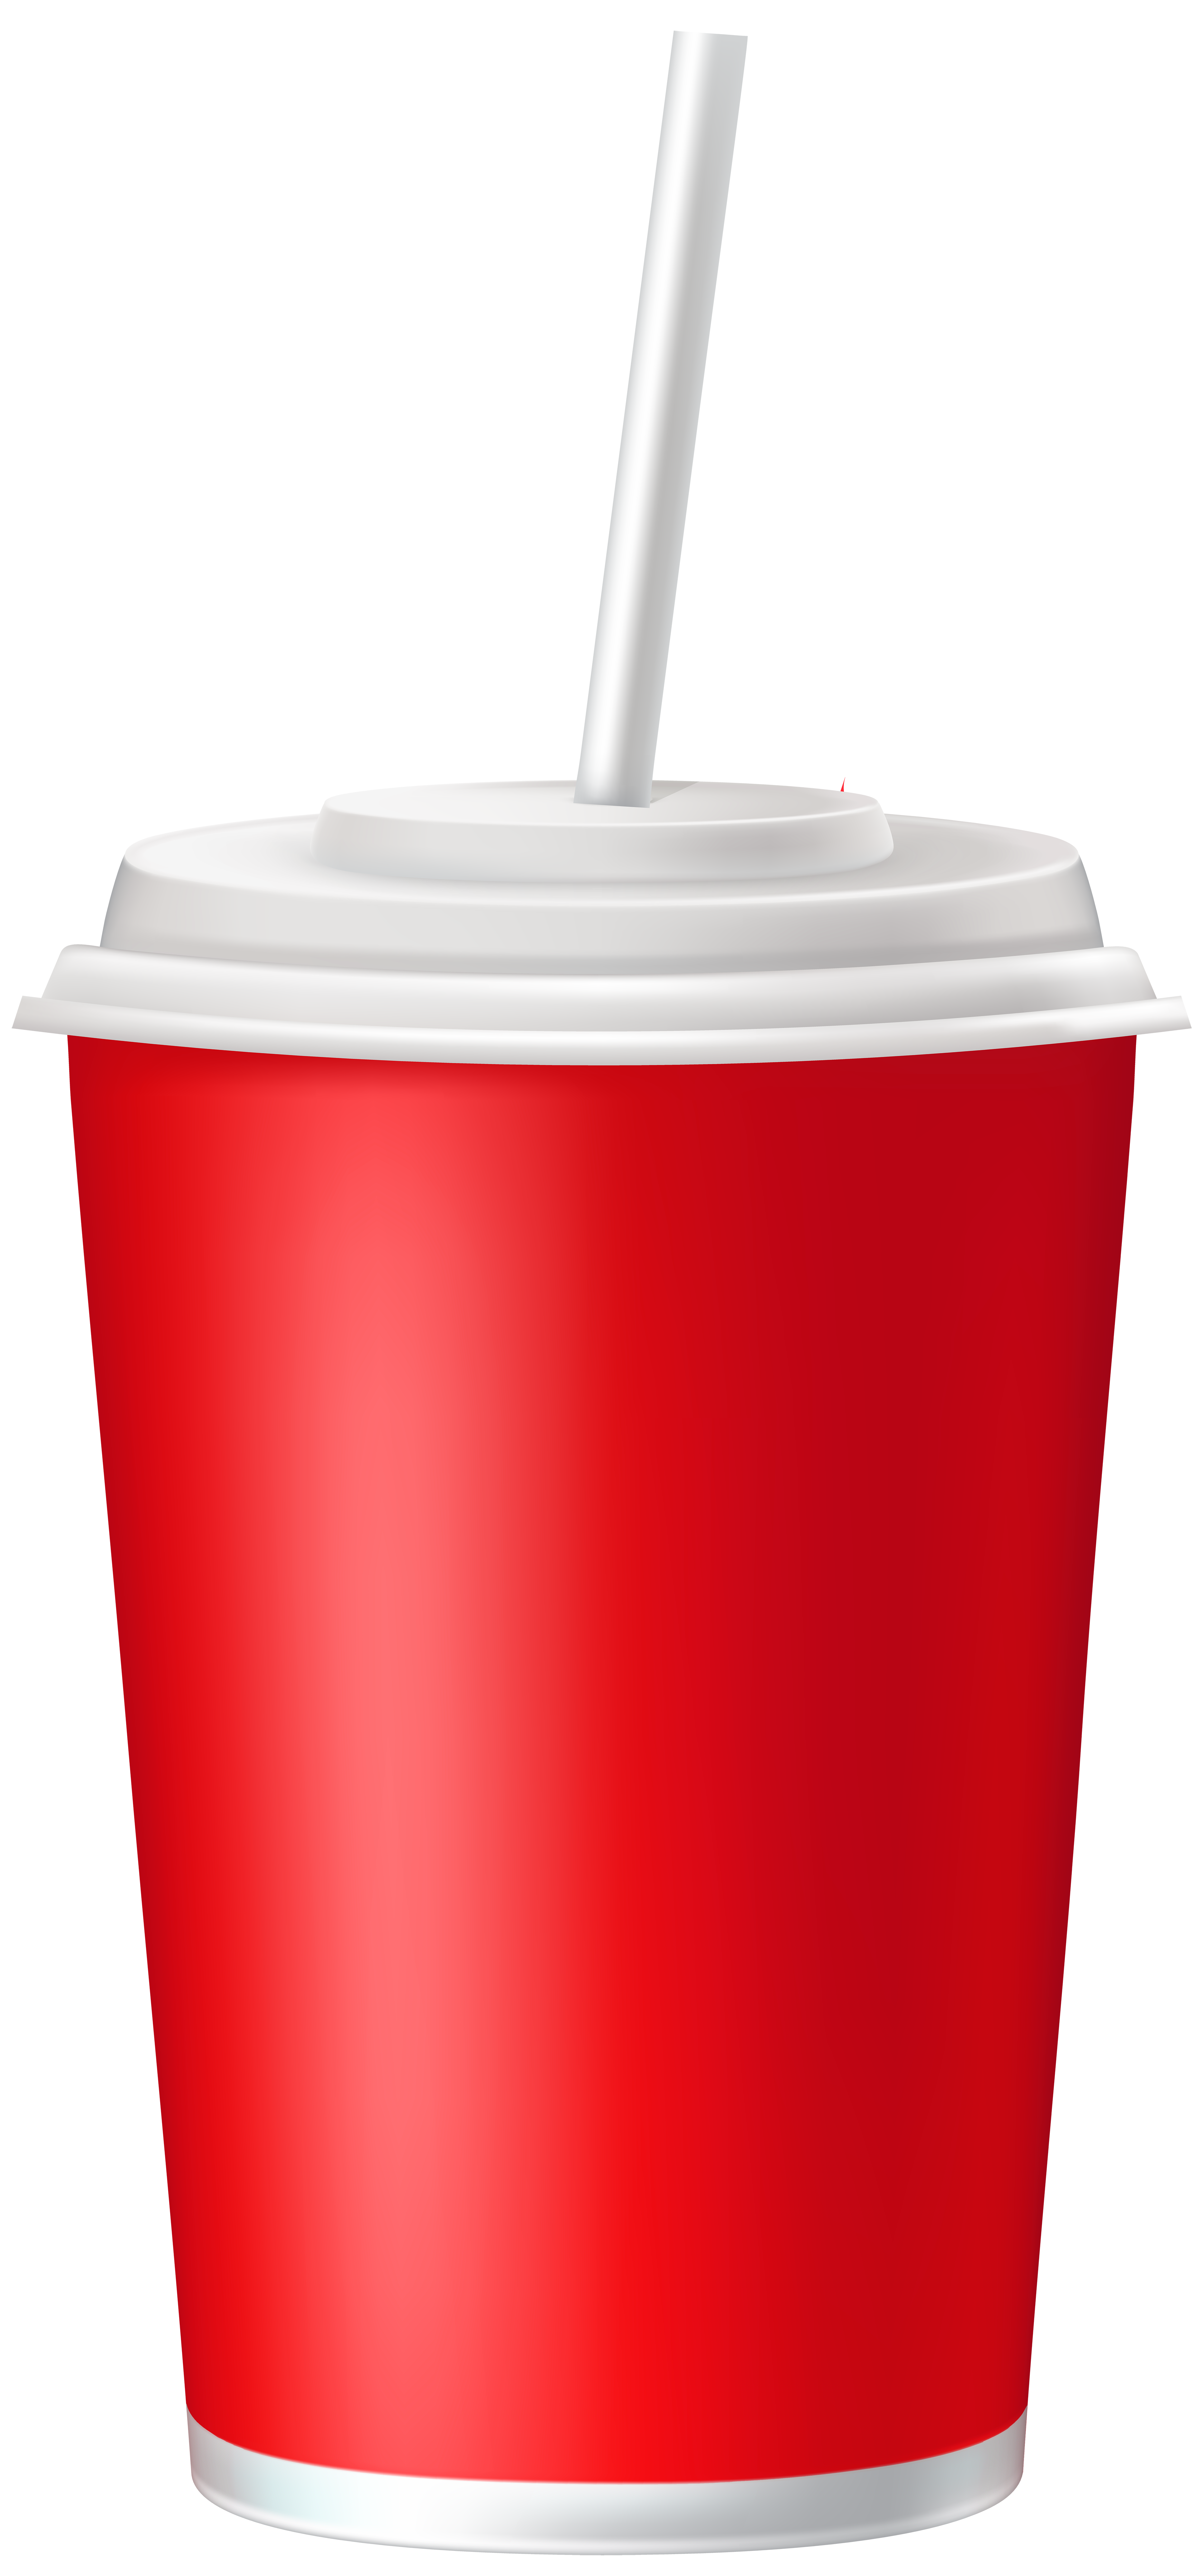 Plastic Cup With Straw PNG Clipart ?m=1562064958